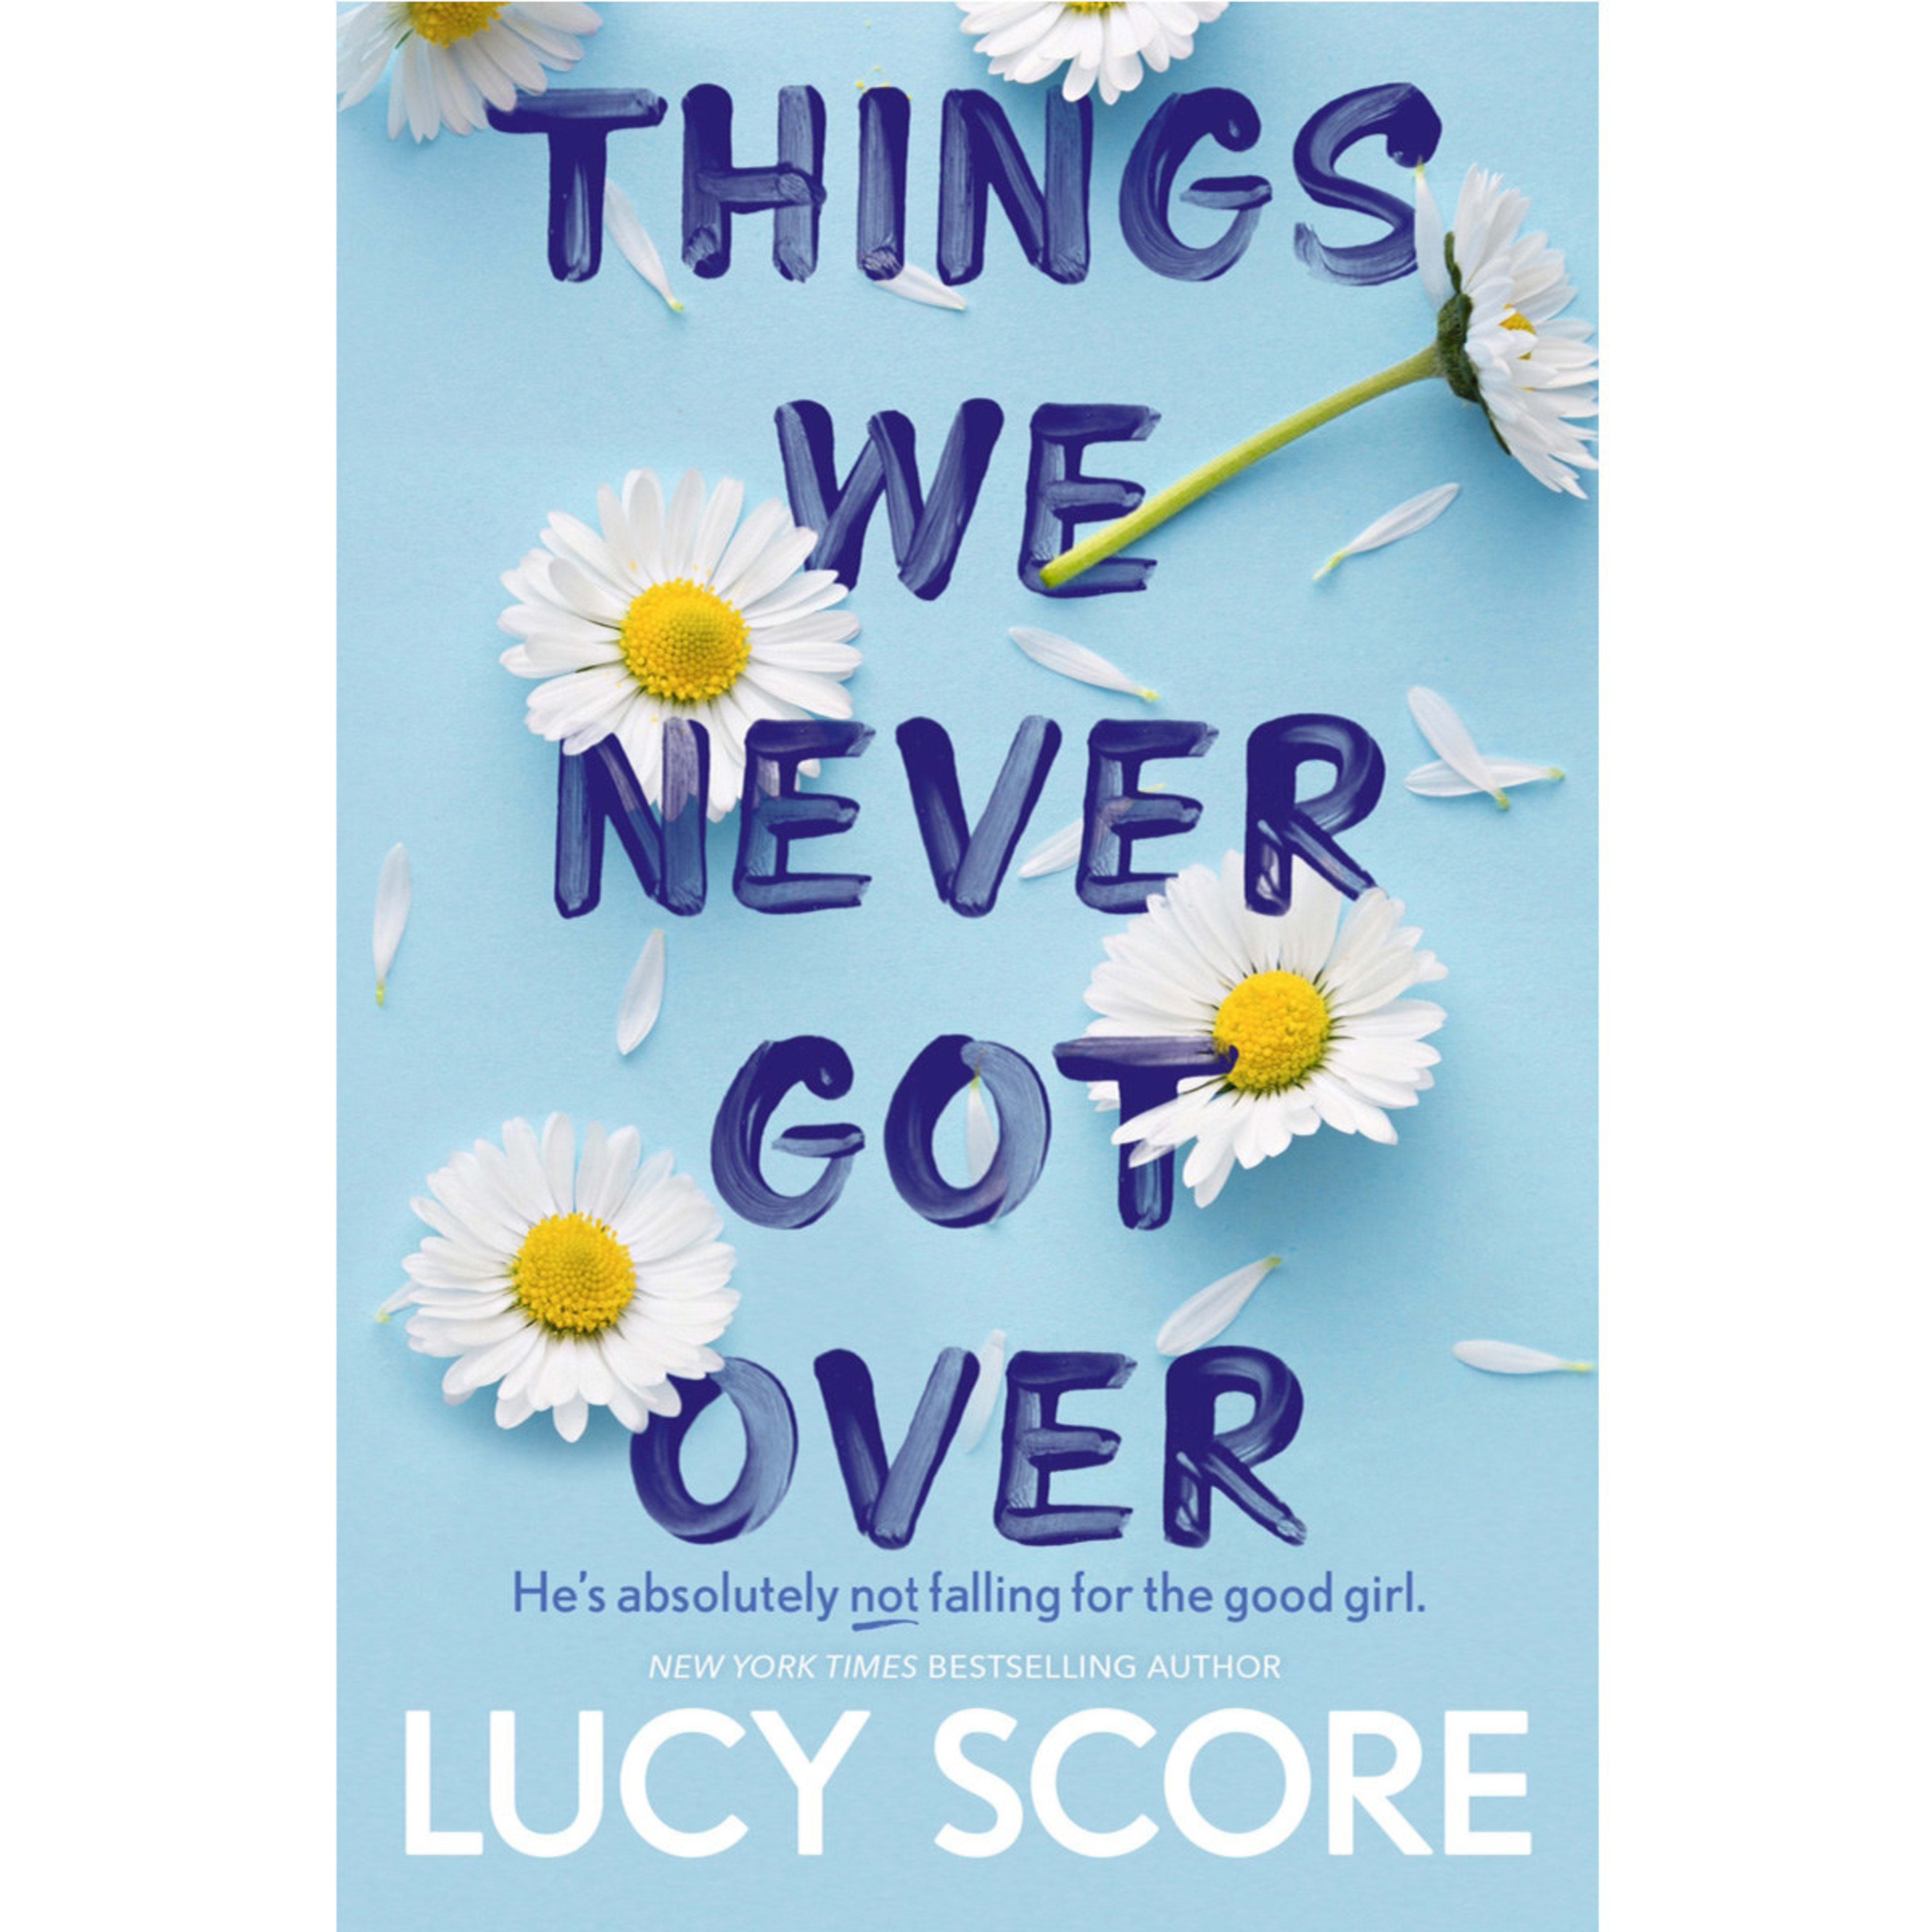 Things We Never Got Over by Lucy Score - Book